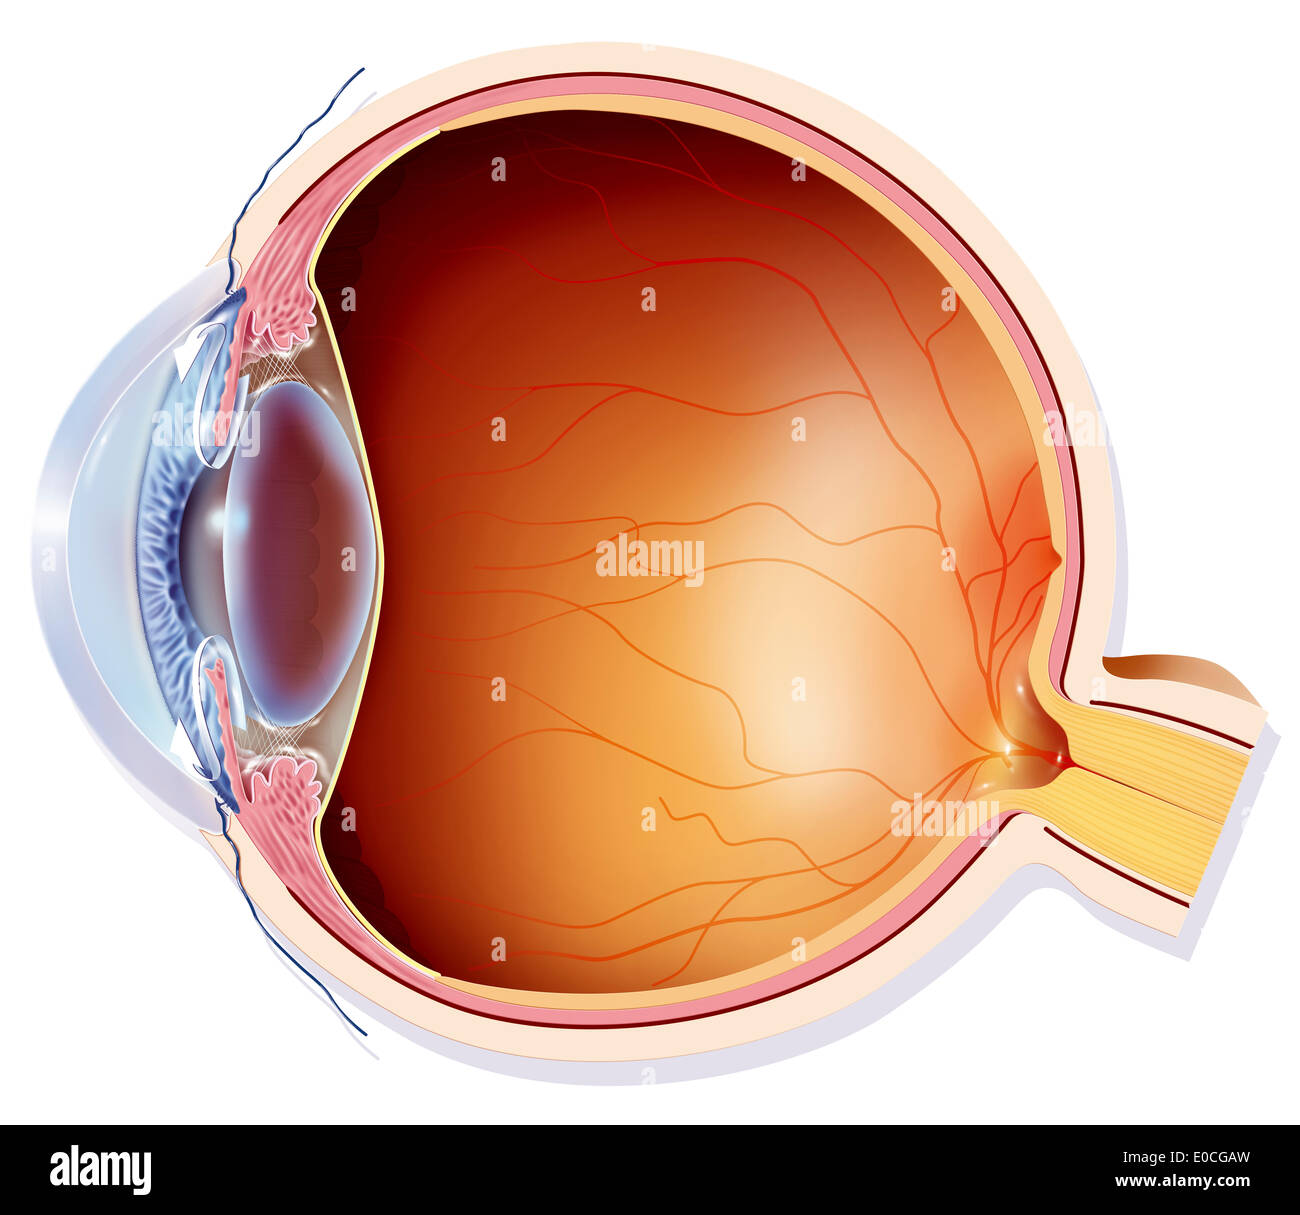 Glaucoma, drawing Stock Photo